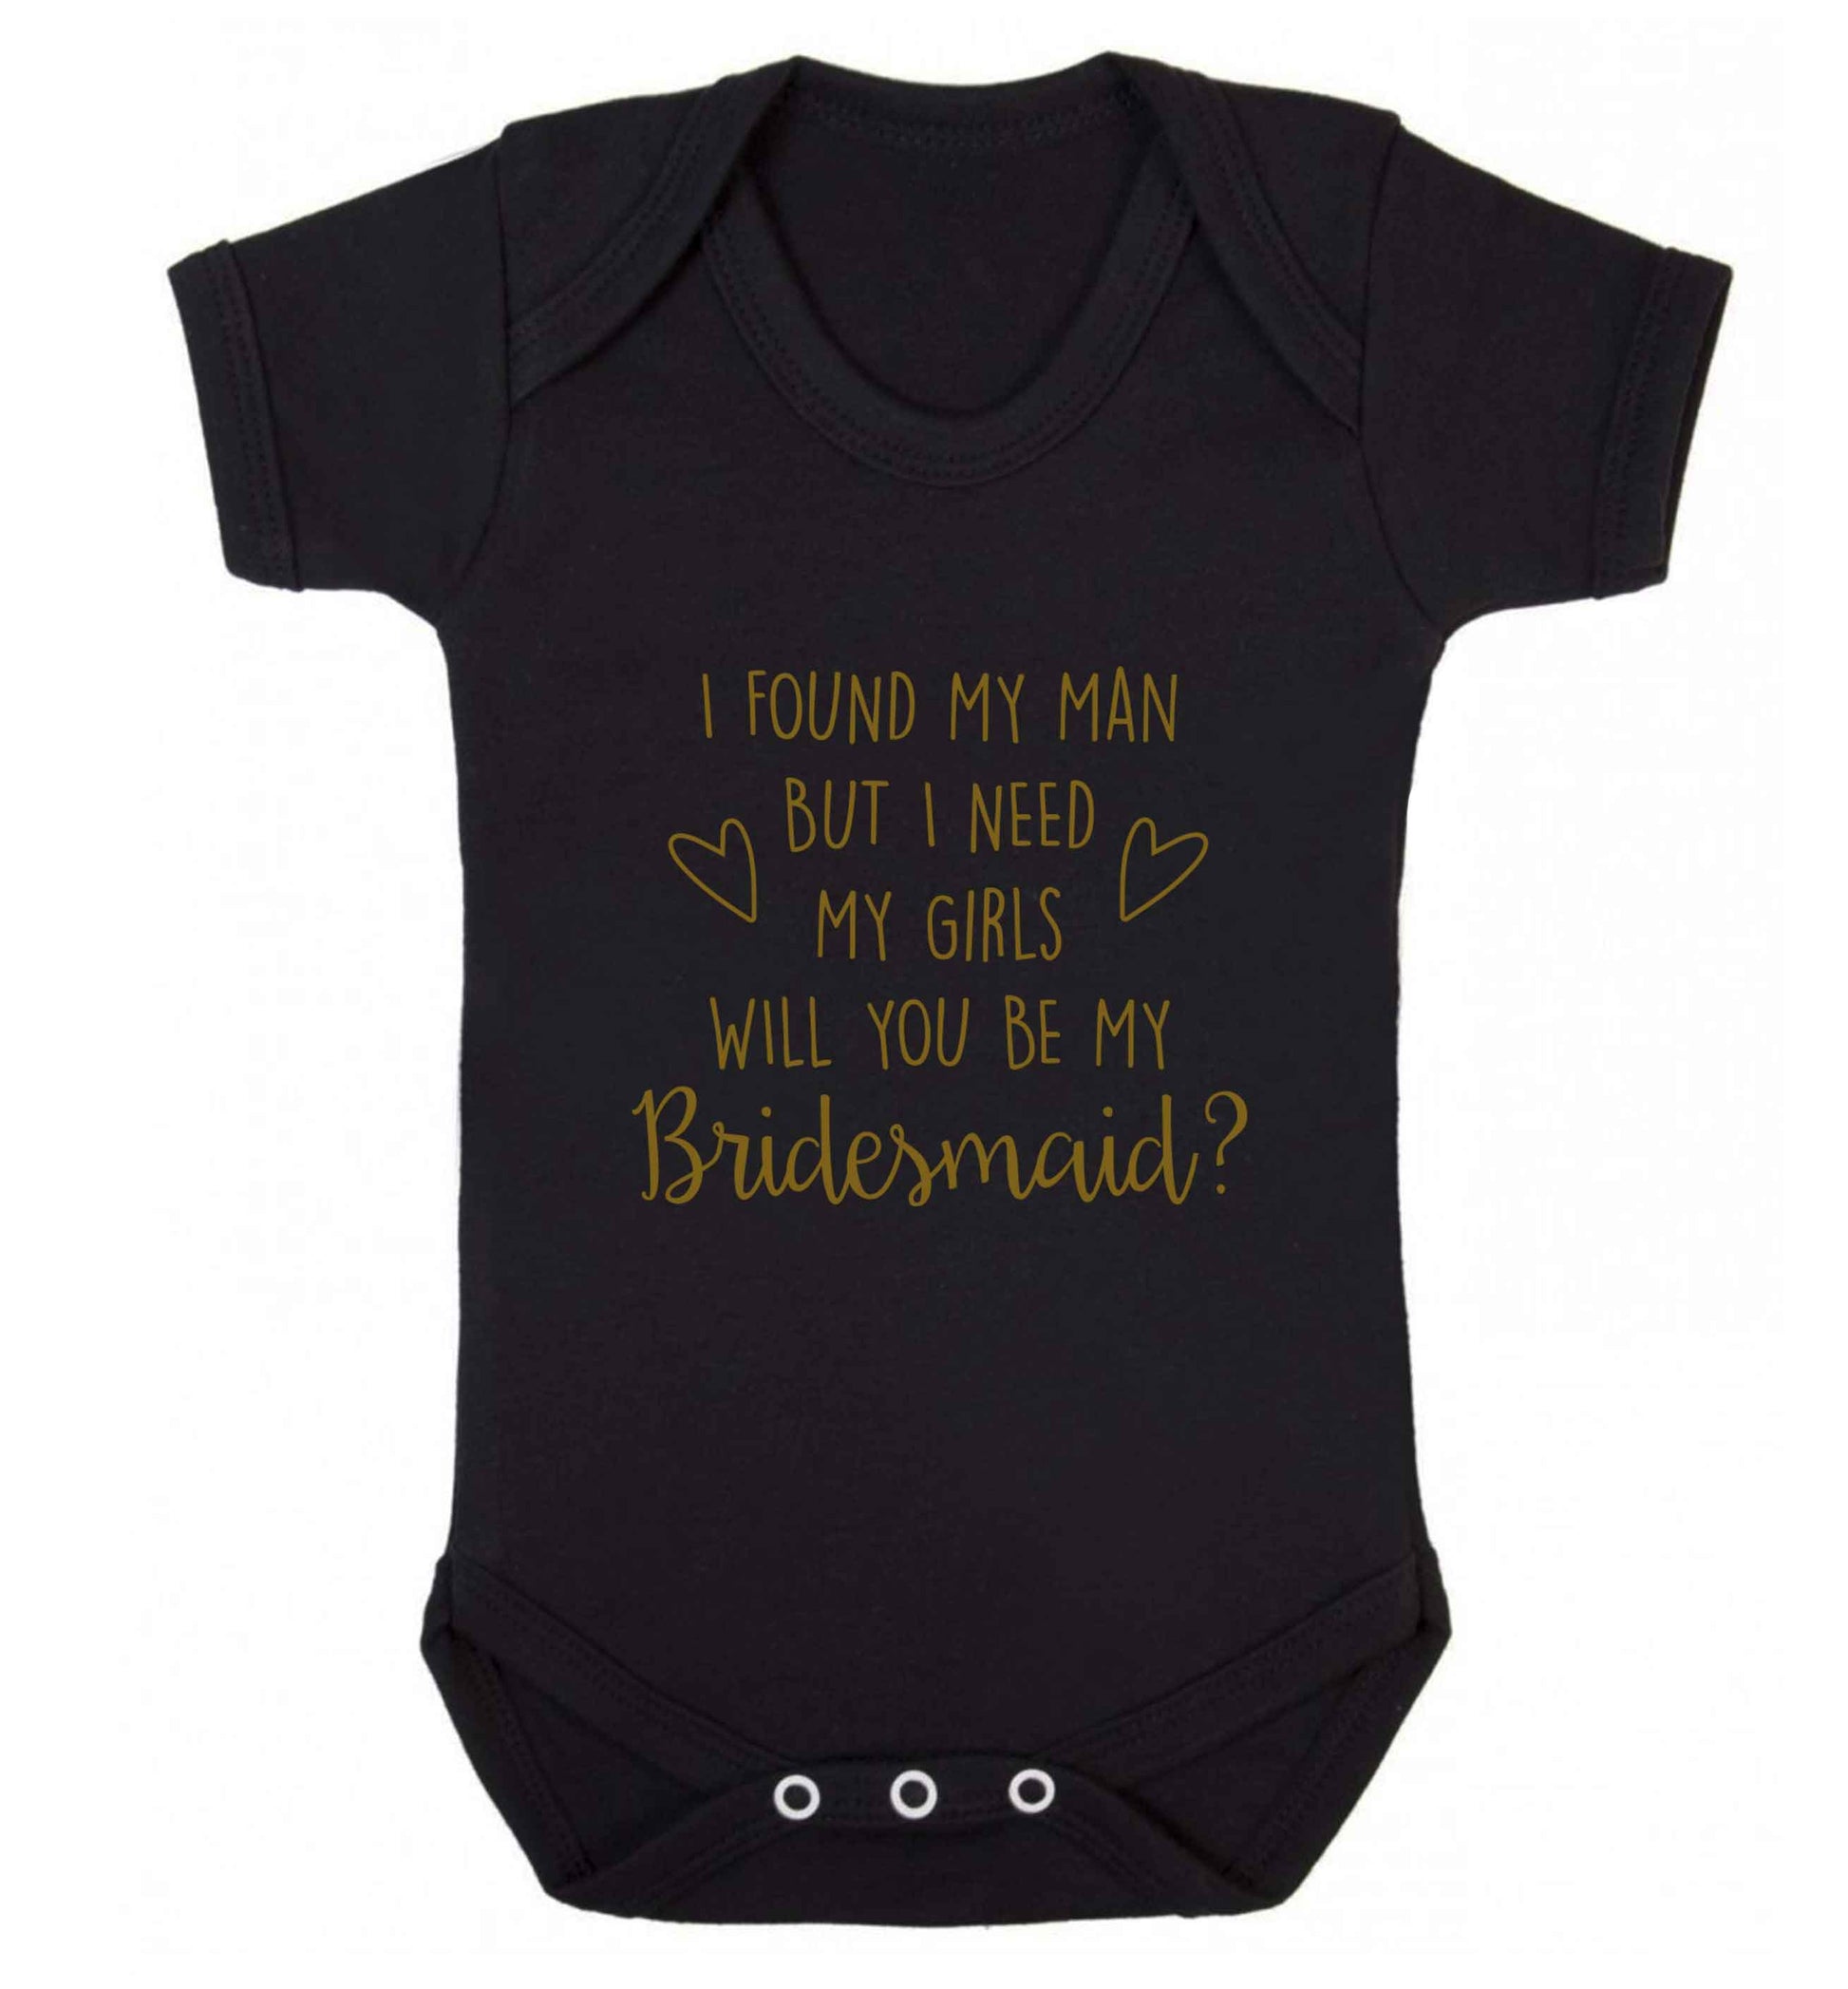 I found my man but I need my girls will you be my bridesmaid? baby vest black 18-24 months